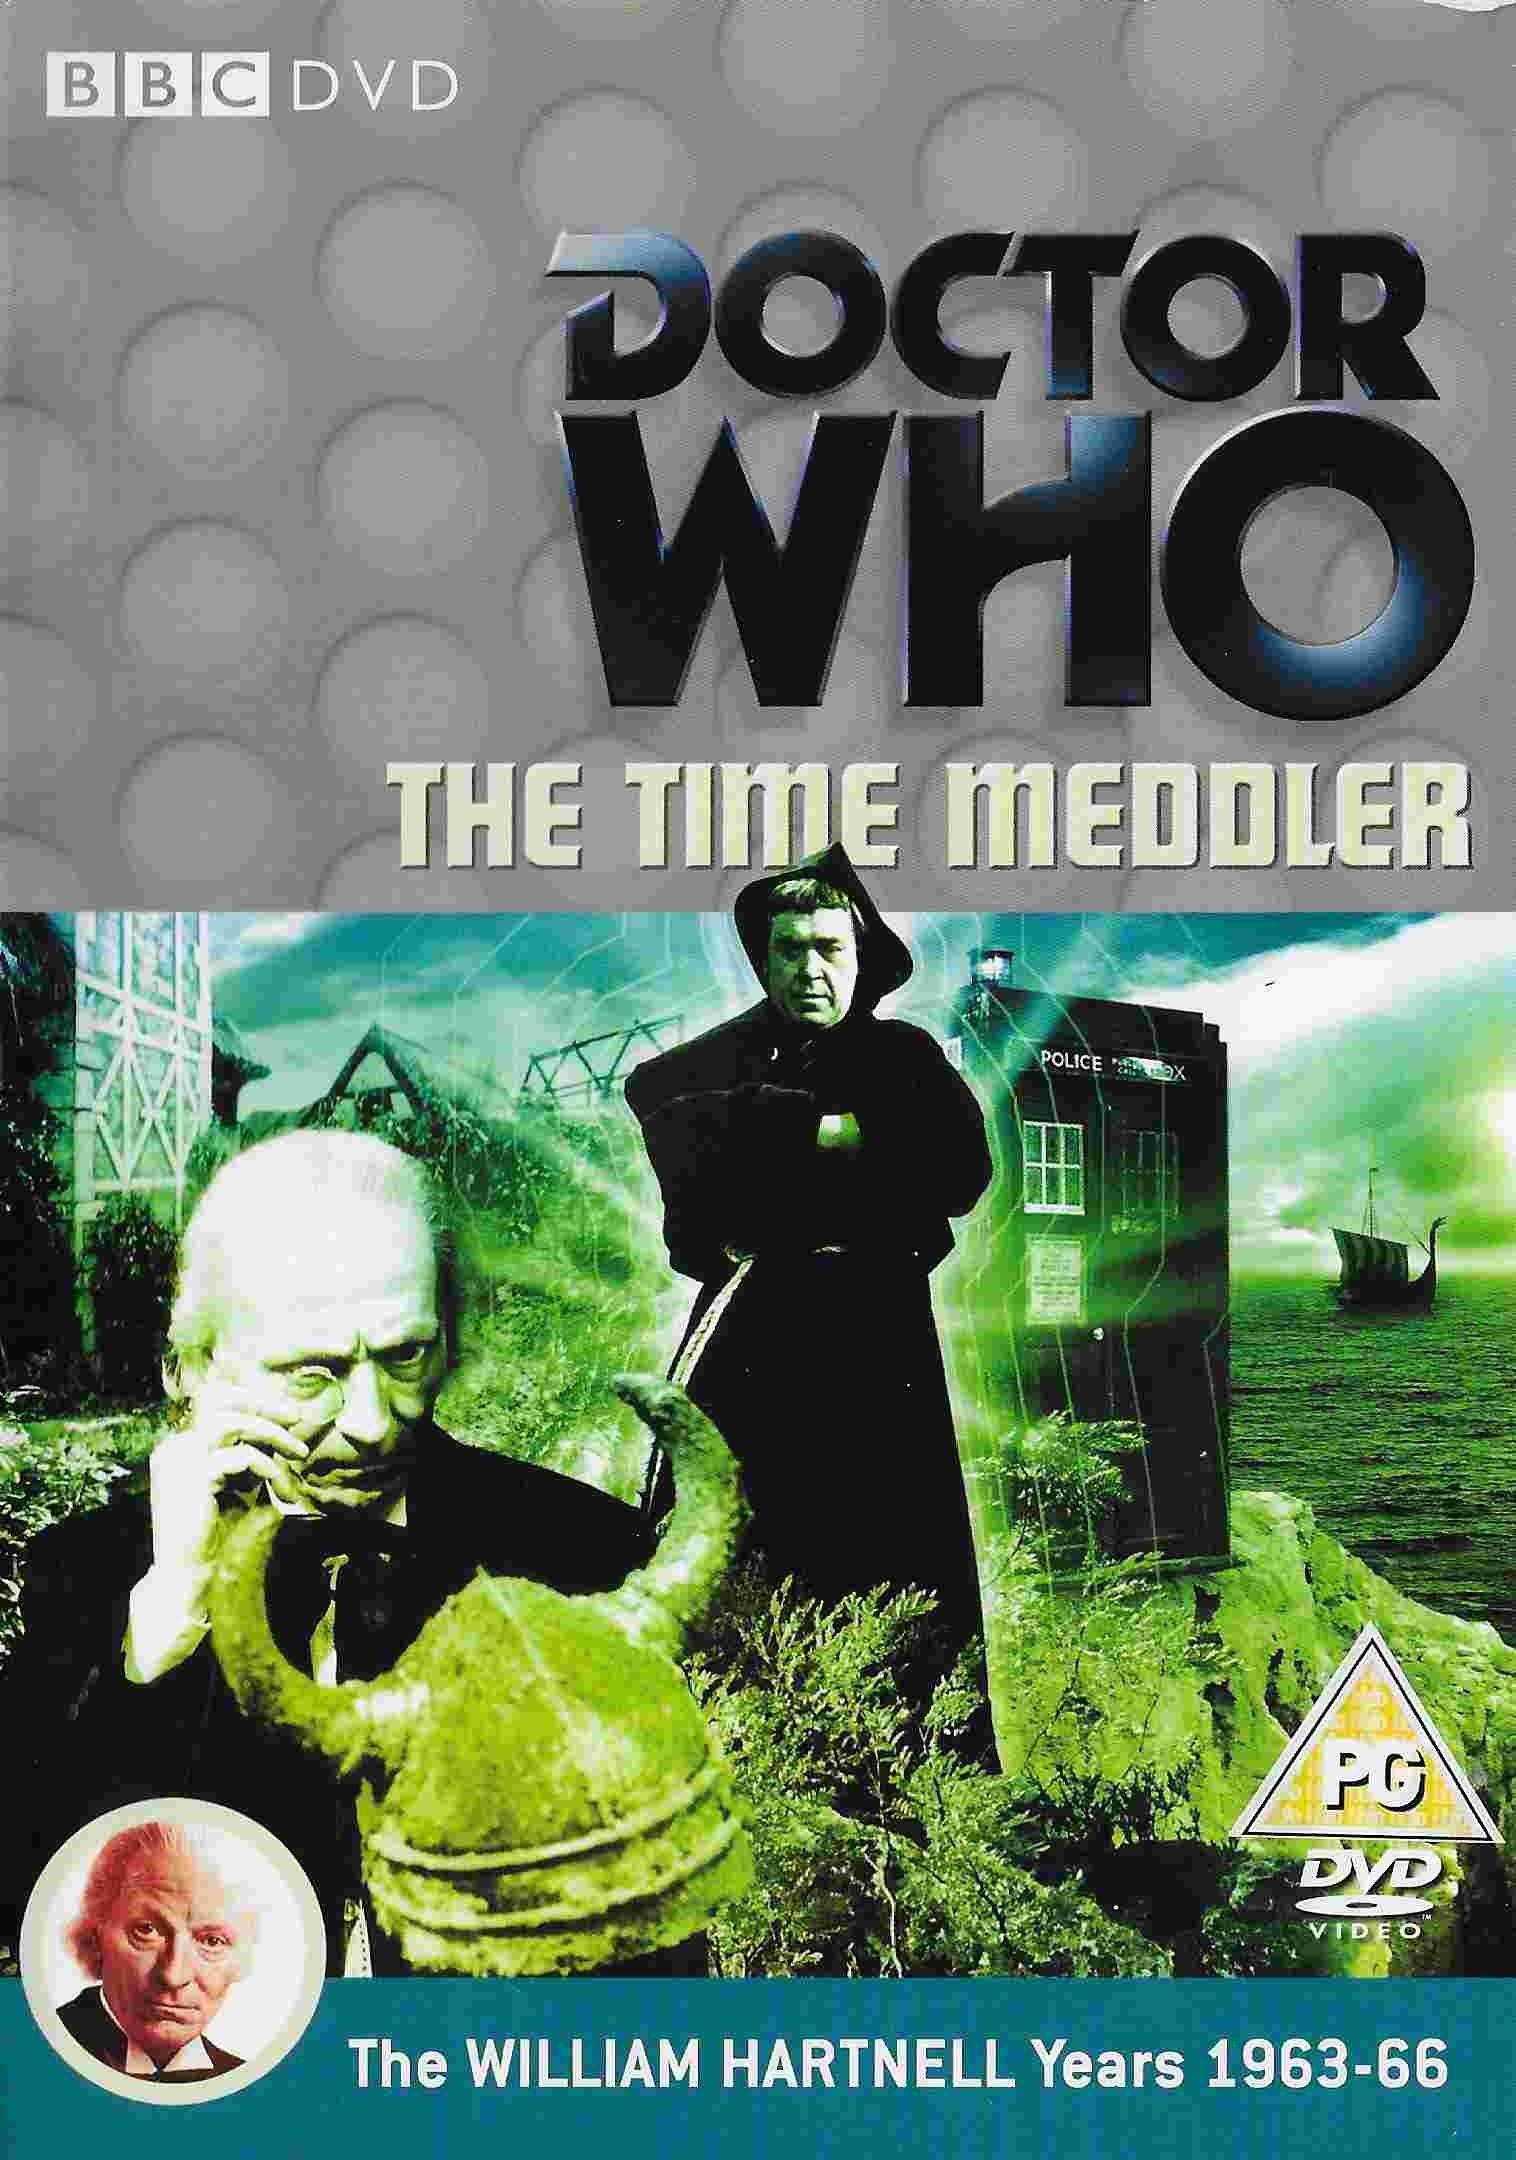 Picture of BBCDVD 2331 Doctor Who - The time medler by artist Dennis Spooner from the BBC records and Tapes library